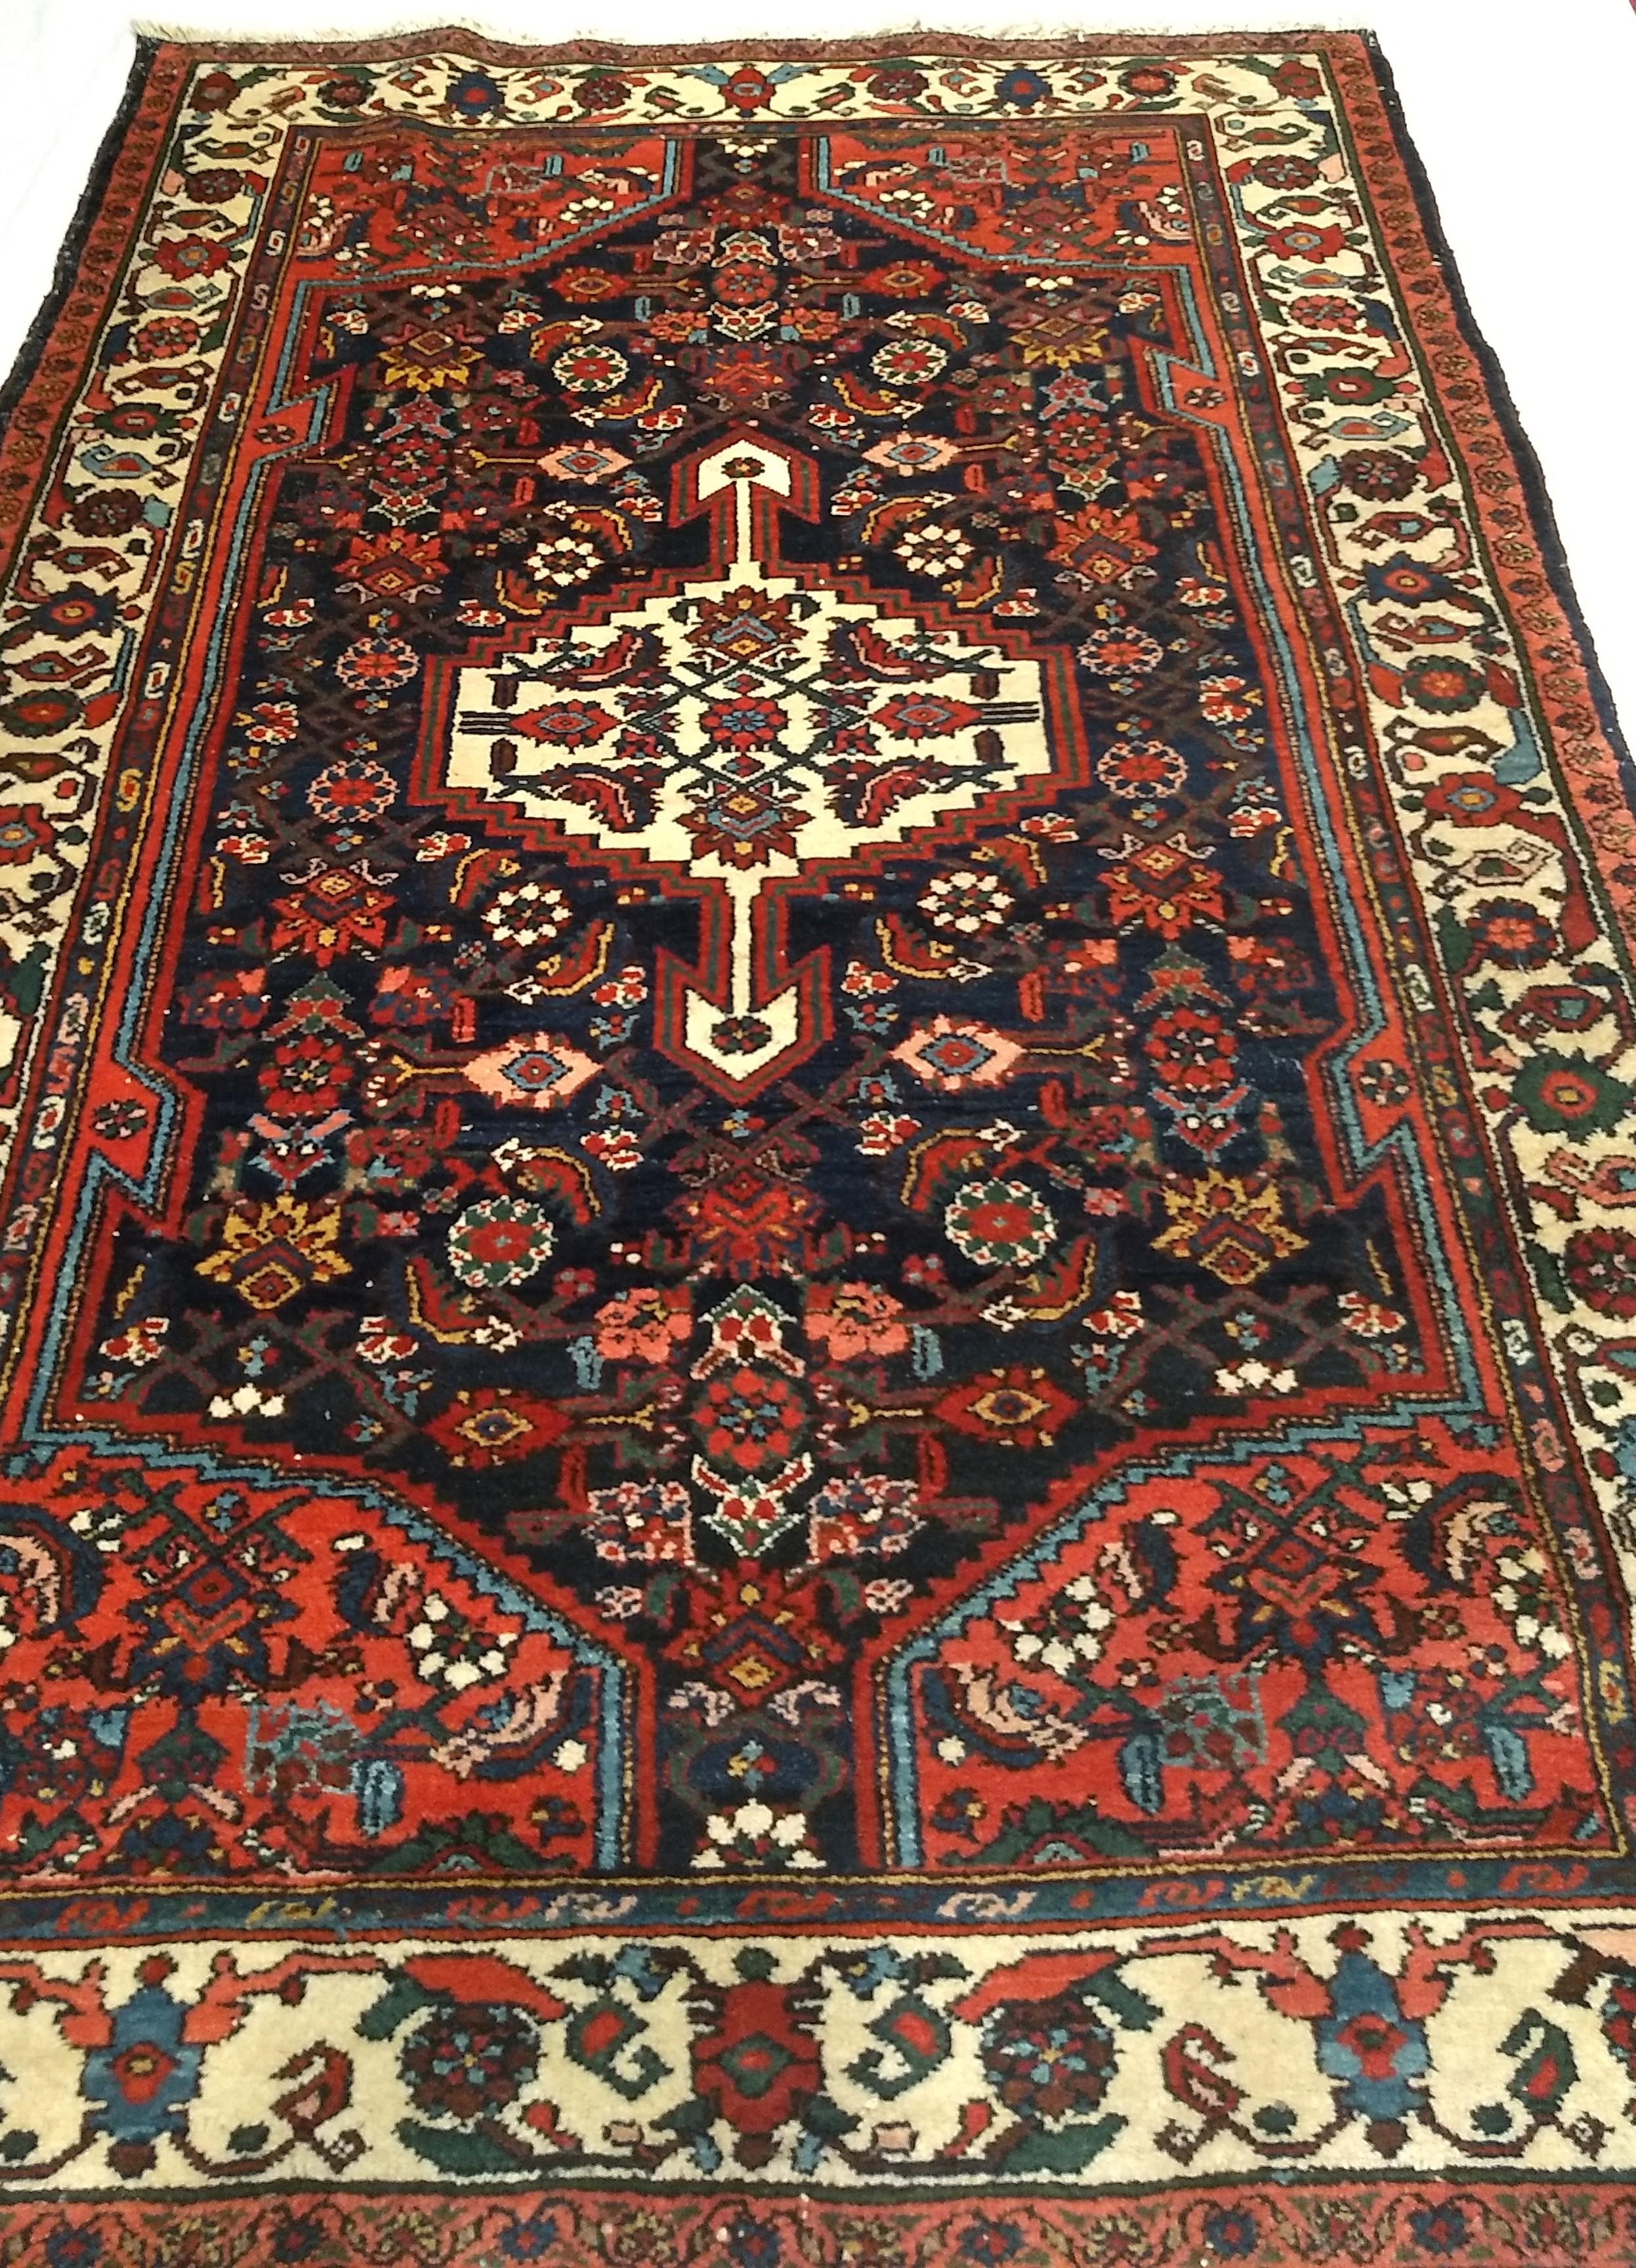 Vintage Persian Bakhtiari tribal rug from Western Persia from the 1st half of the 1900s in a medallion pattern.  Bakhtiari rugs are renowned for their beautiful design and the use of brilliant colors produced by the use of natural organic dyes.  The